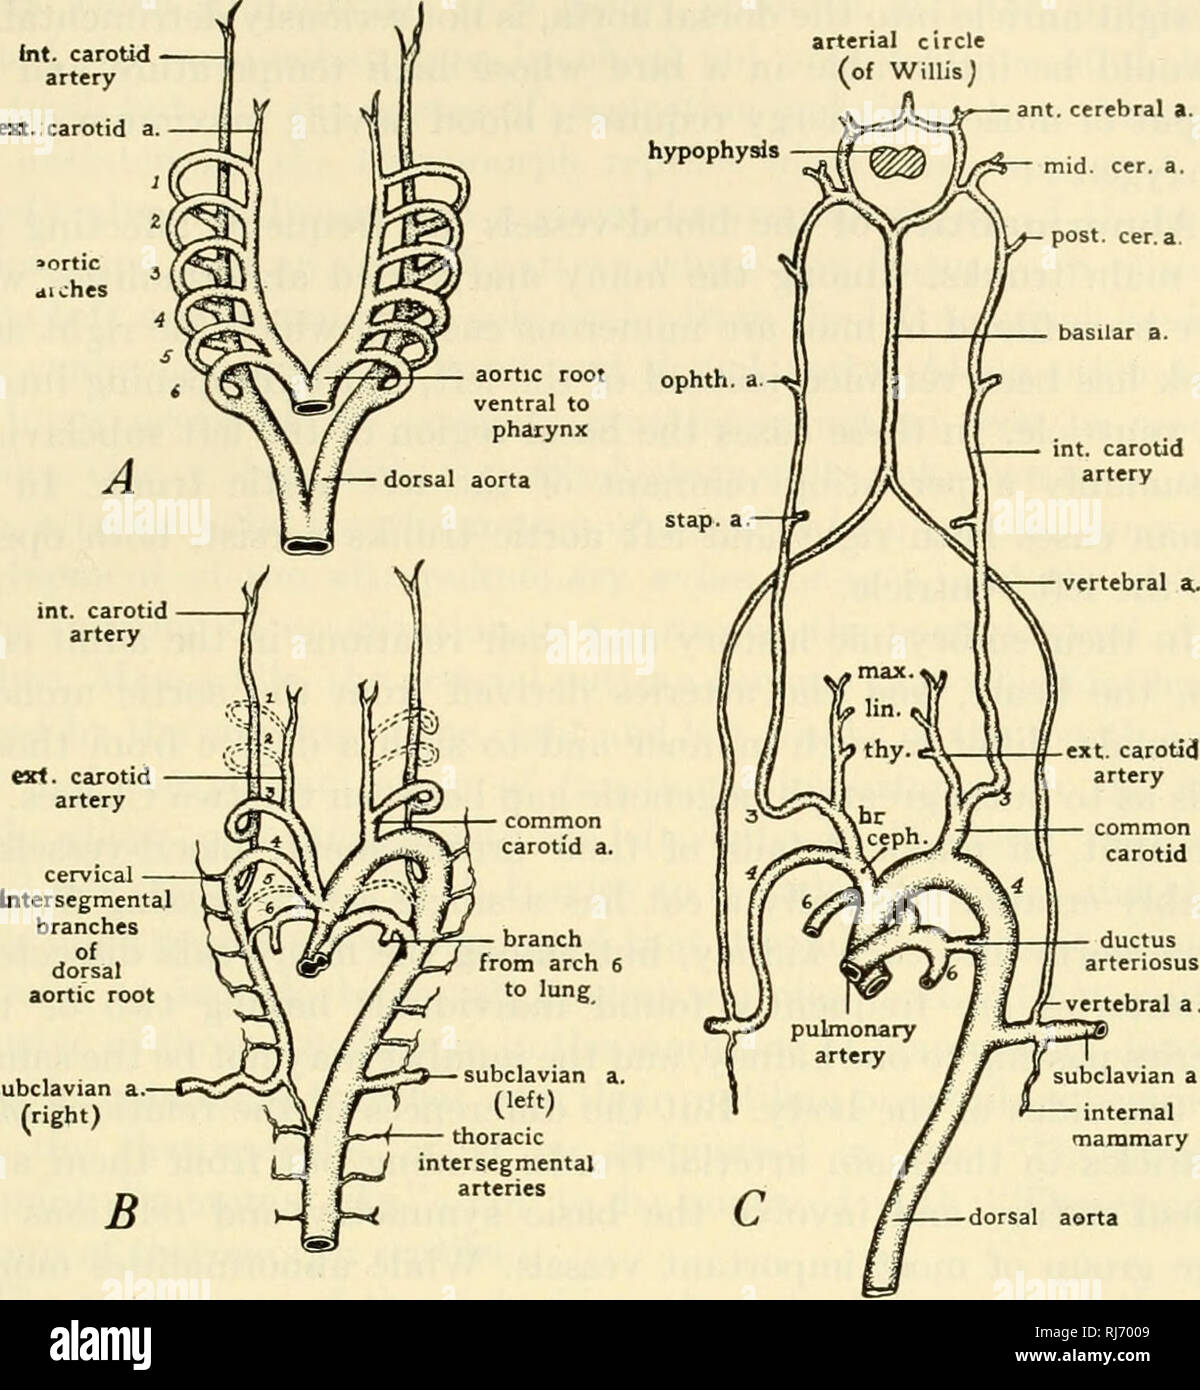 stapedial artery and hyoid artery